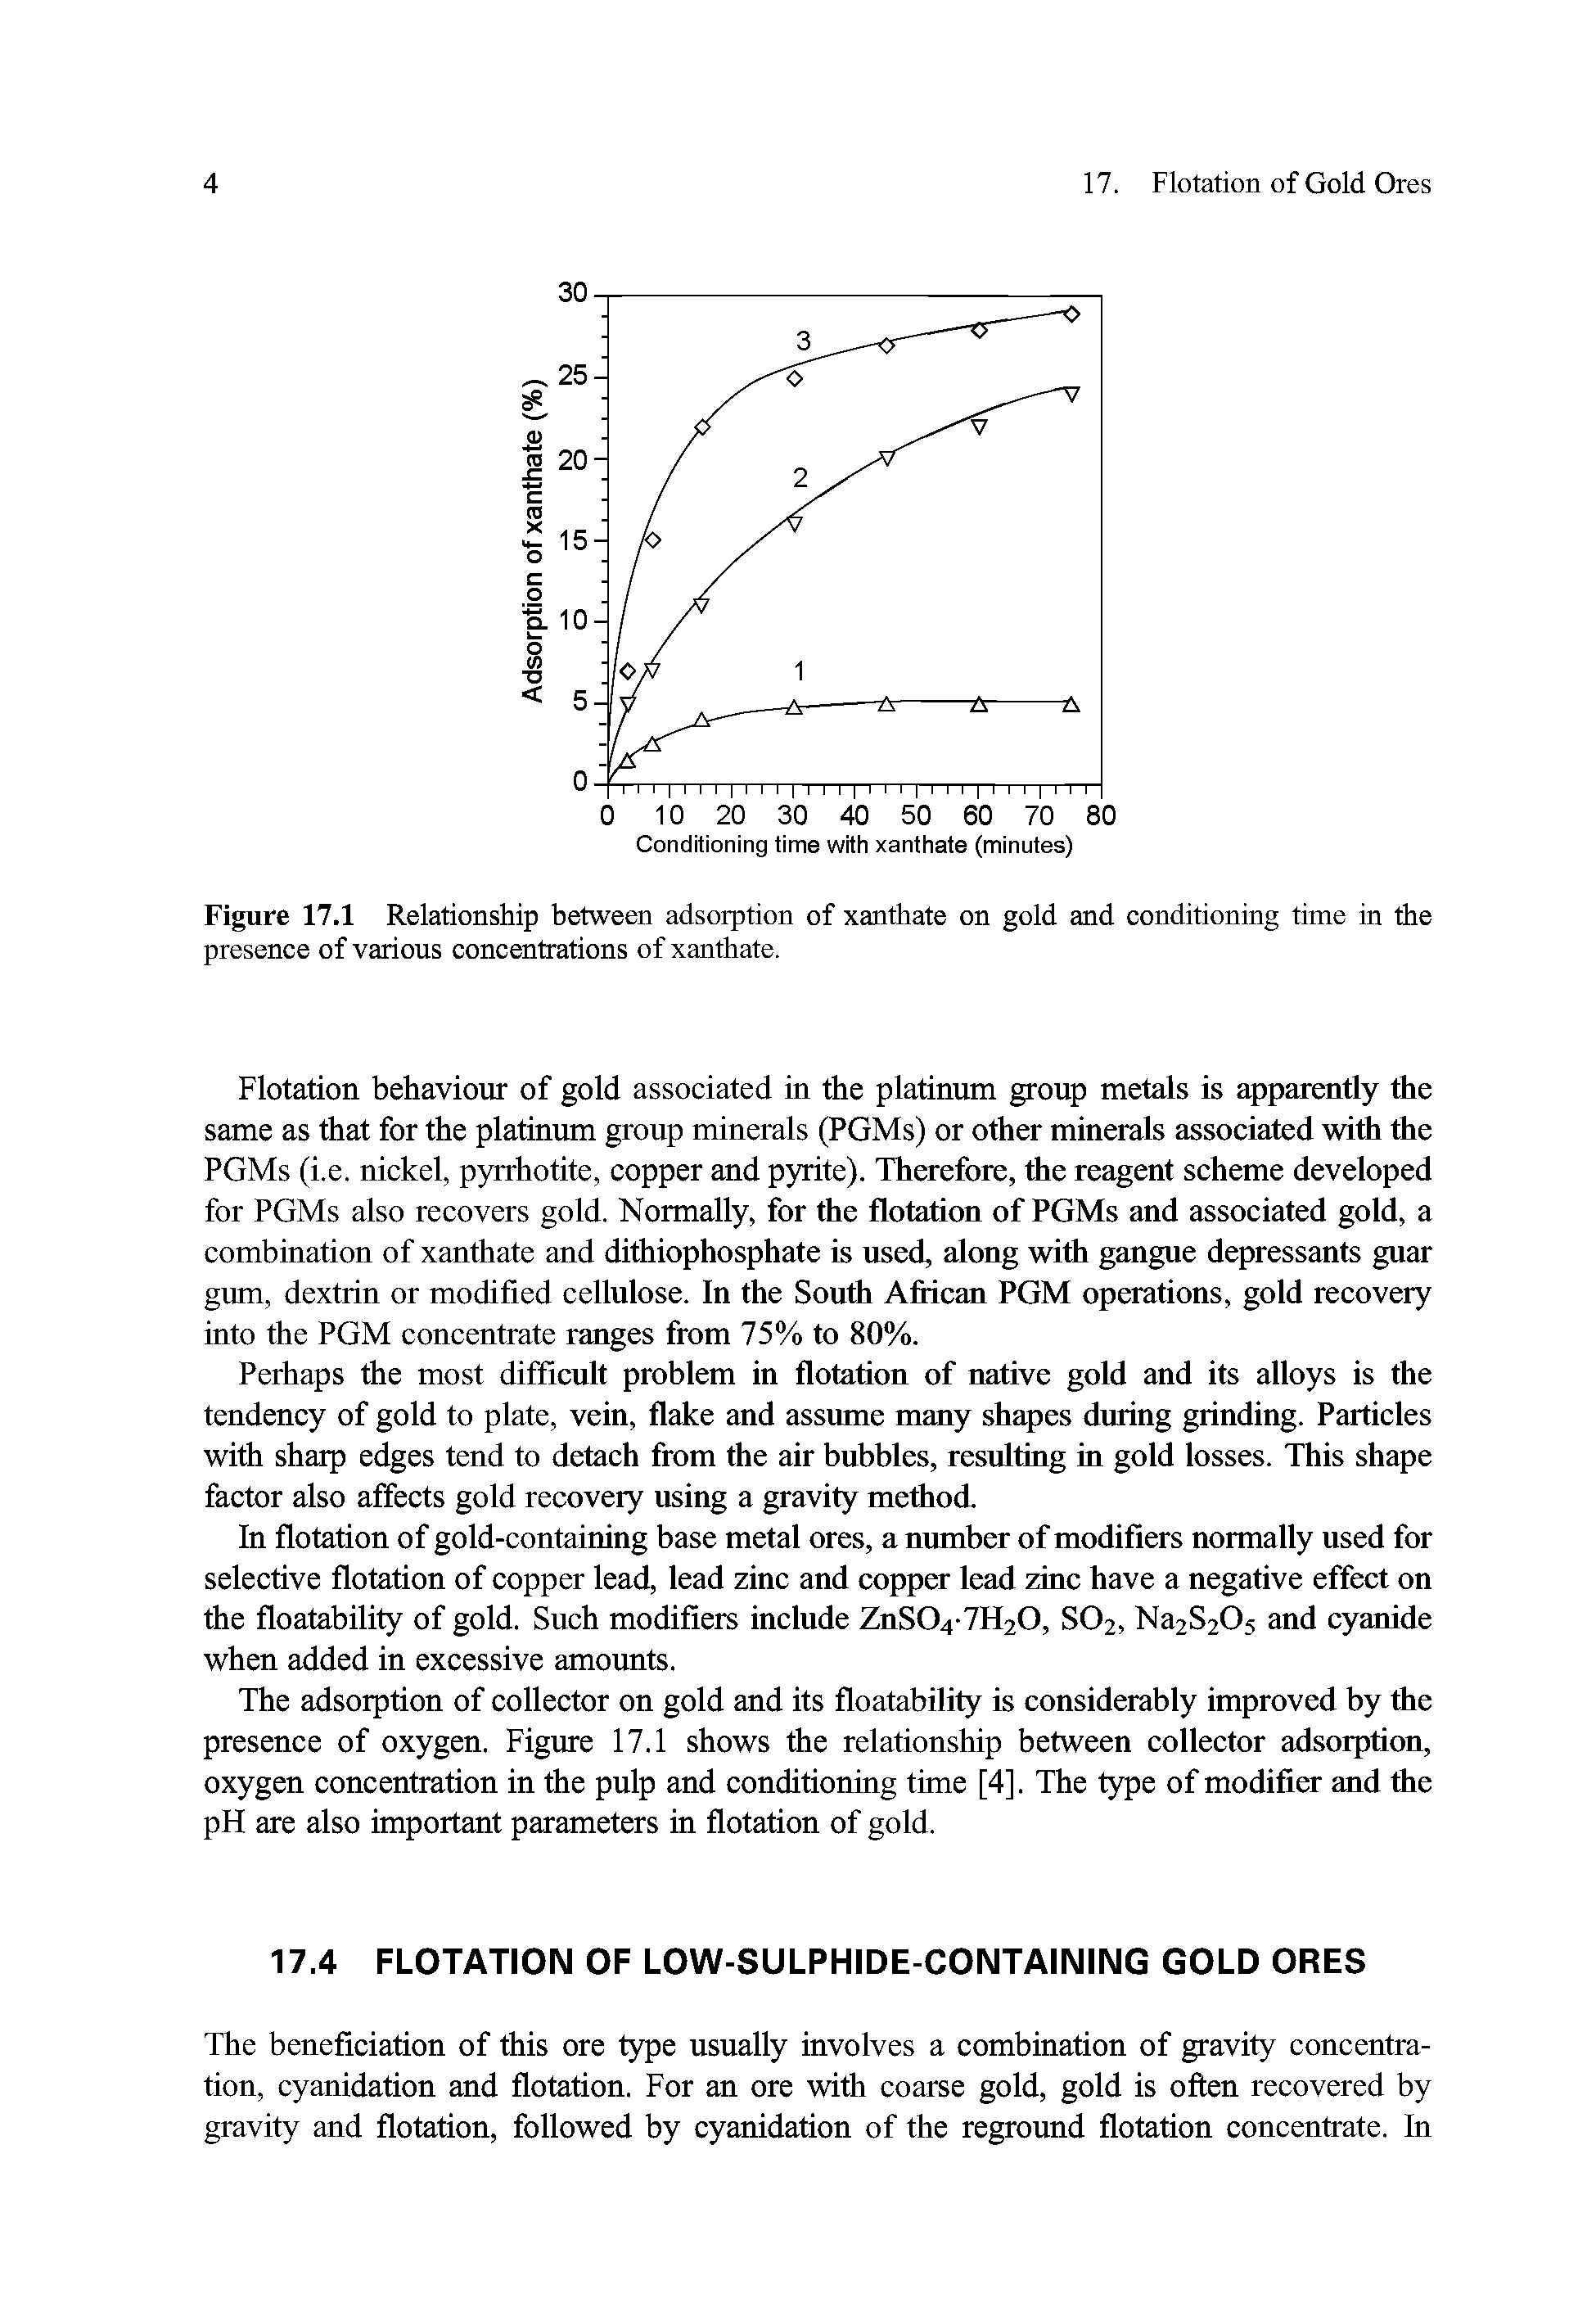 Figure 17.1 Relationship between adsorption of xanthate on gold and conditioning time in the presence of various concentrations of xanthate.